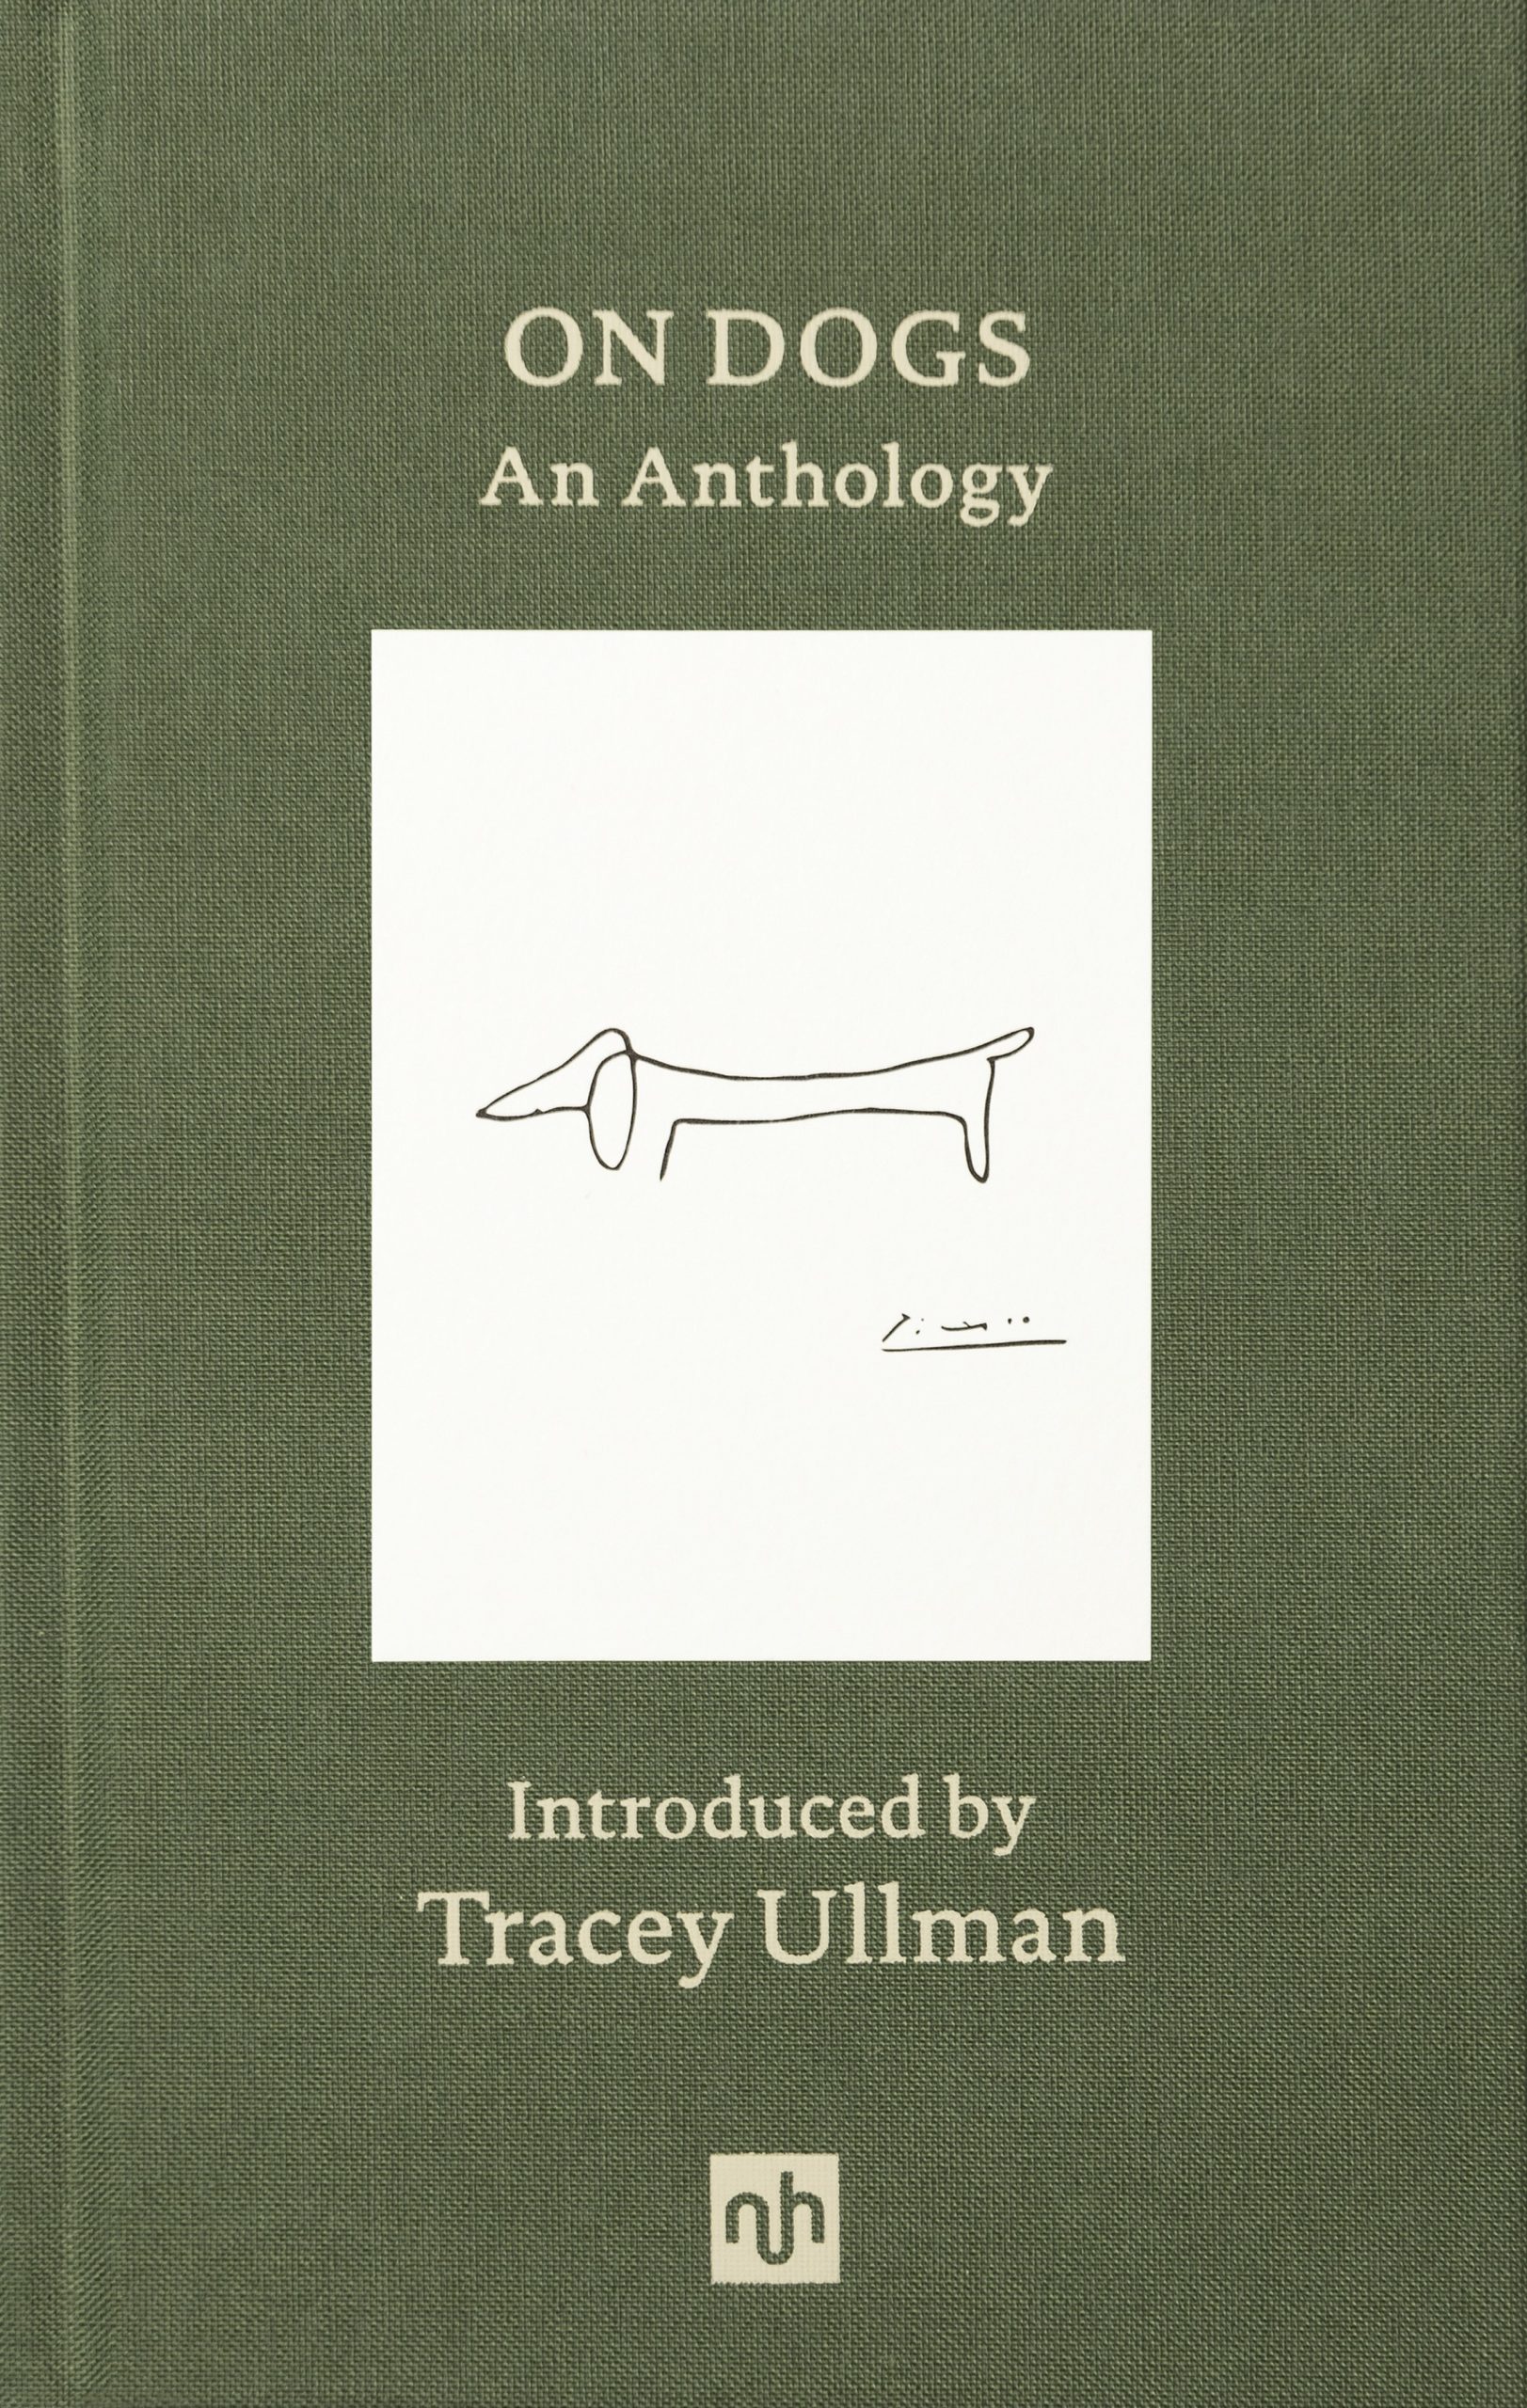 On Dogs: An Anthology